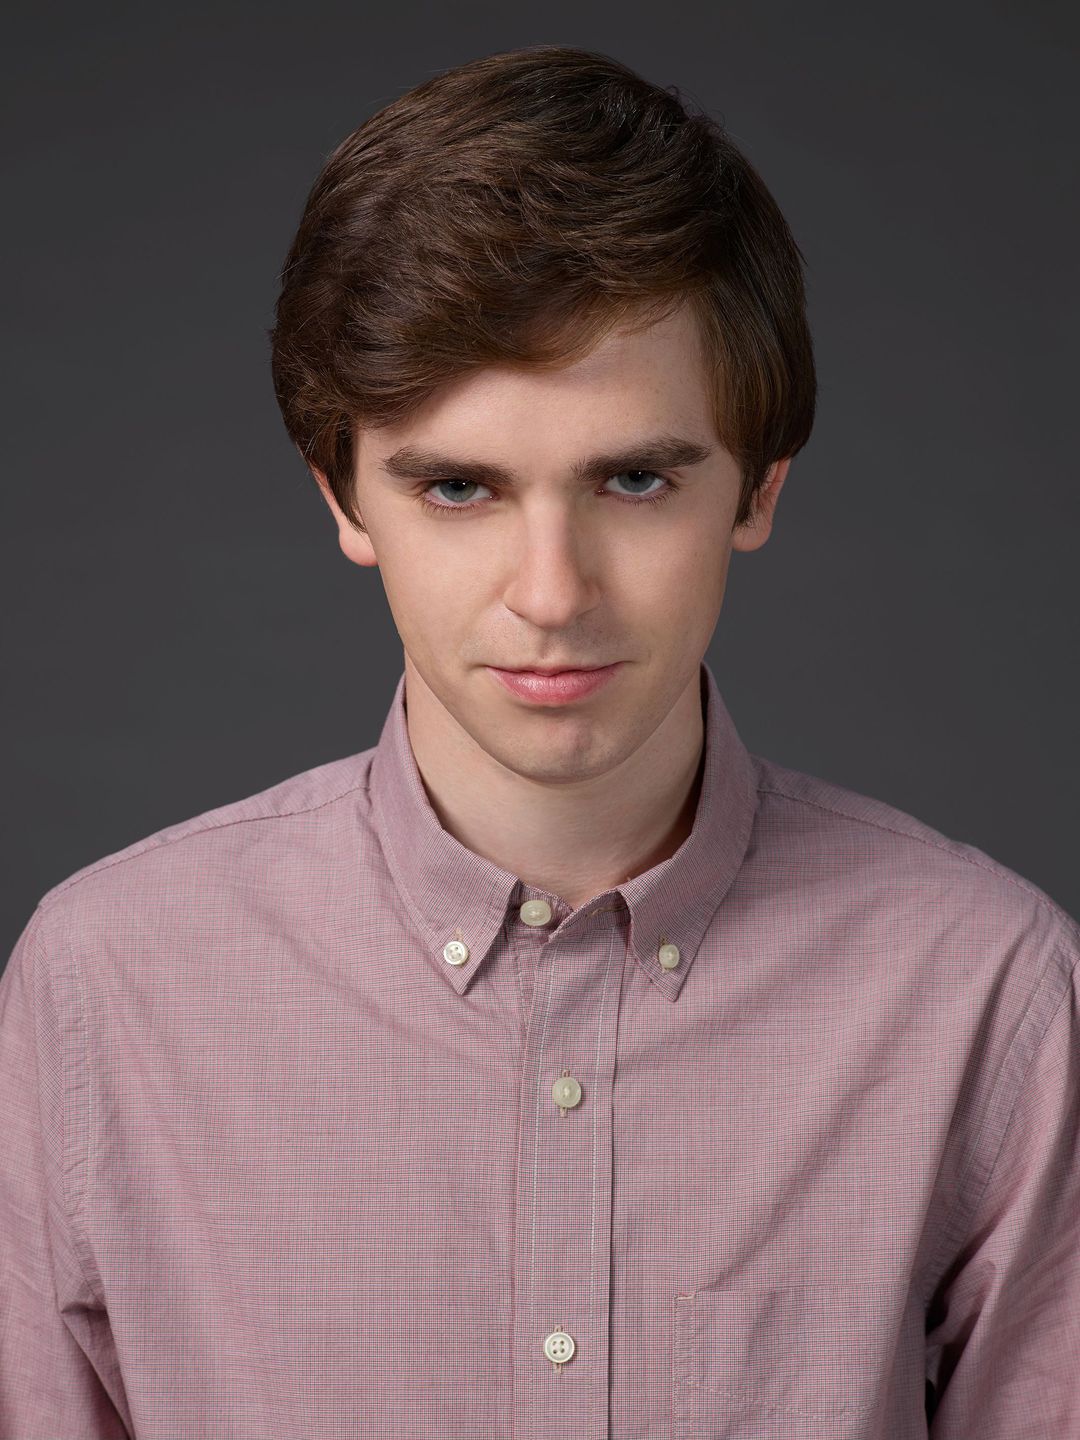 Freddie Highmore young pics